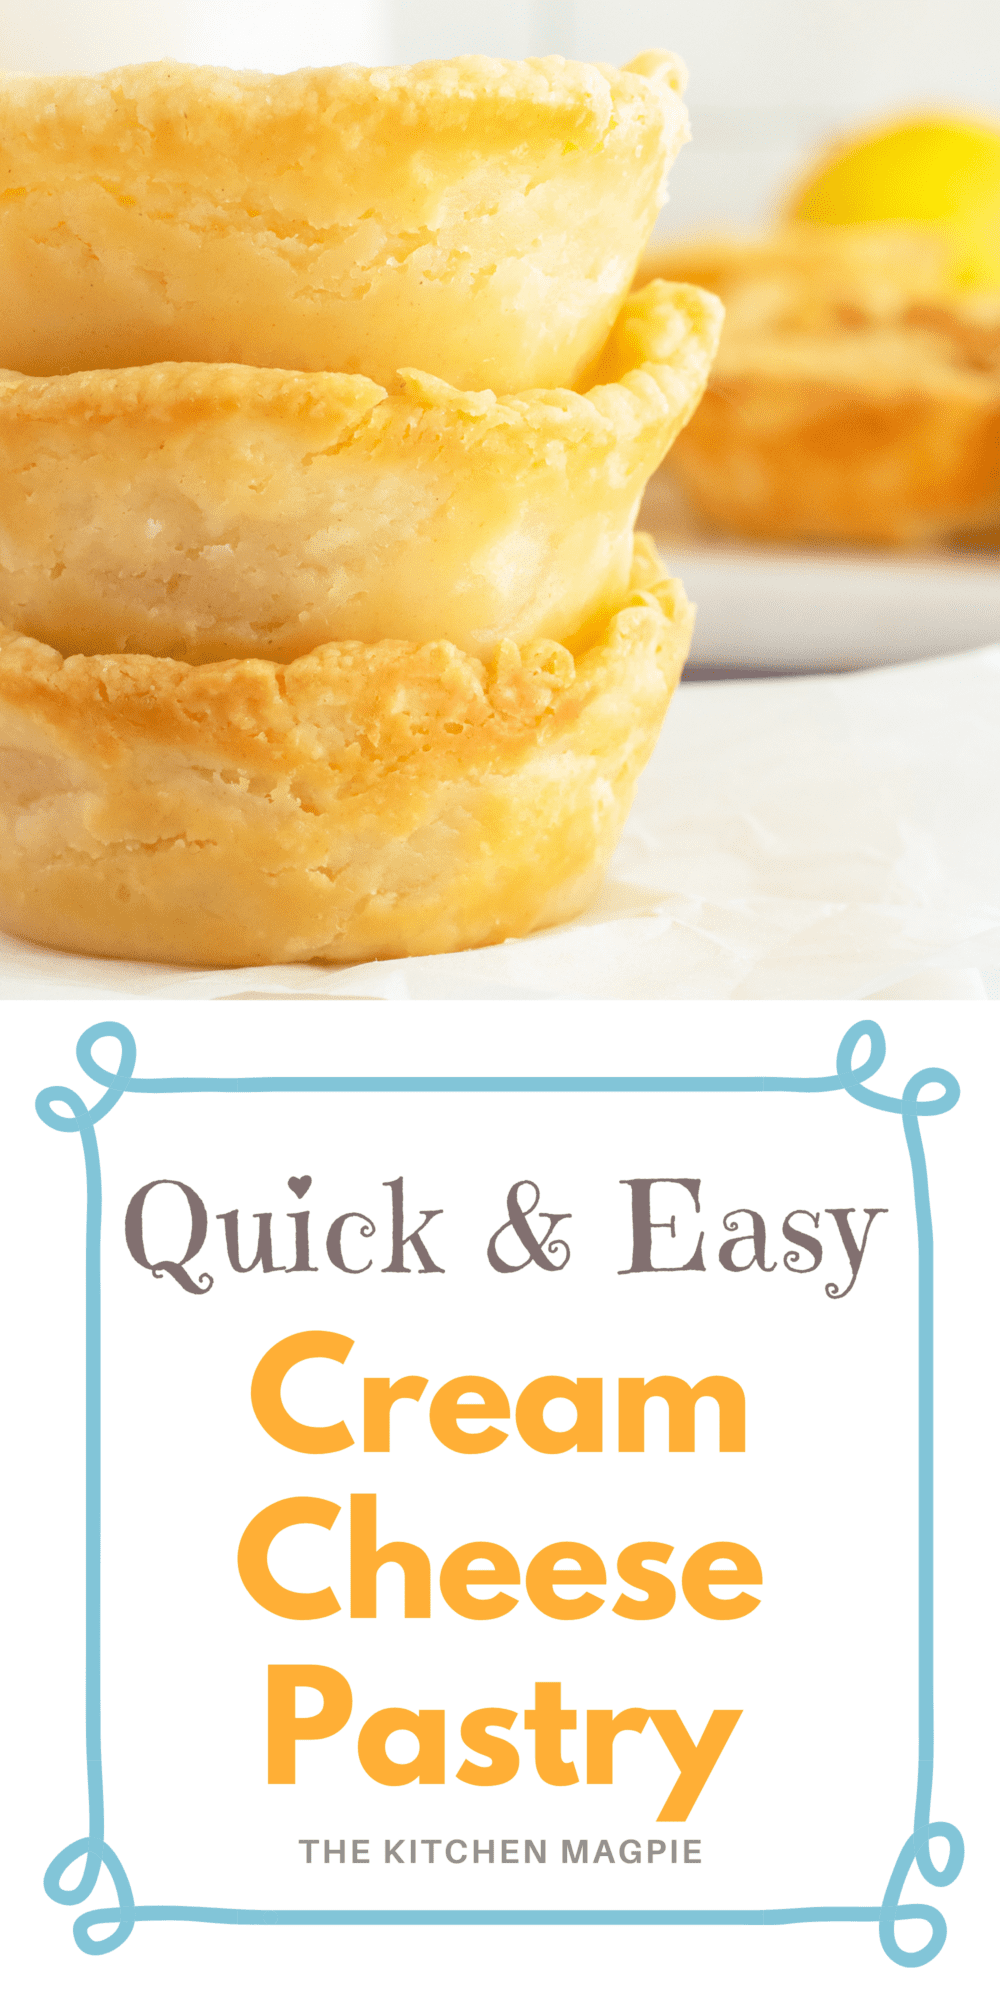 A simple and fluffy cream cheese pastry that whips up in no time at all, perfect for tarts, pies or small hors d'oeuvres.